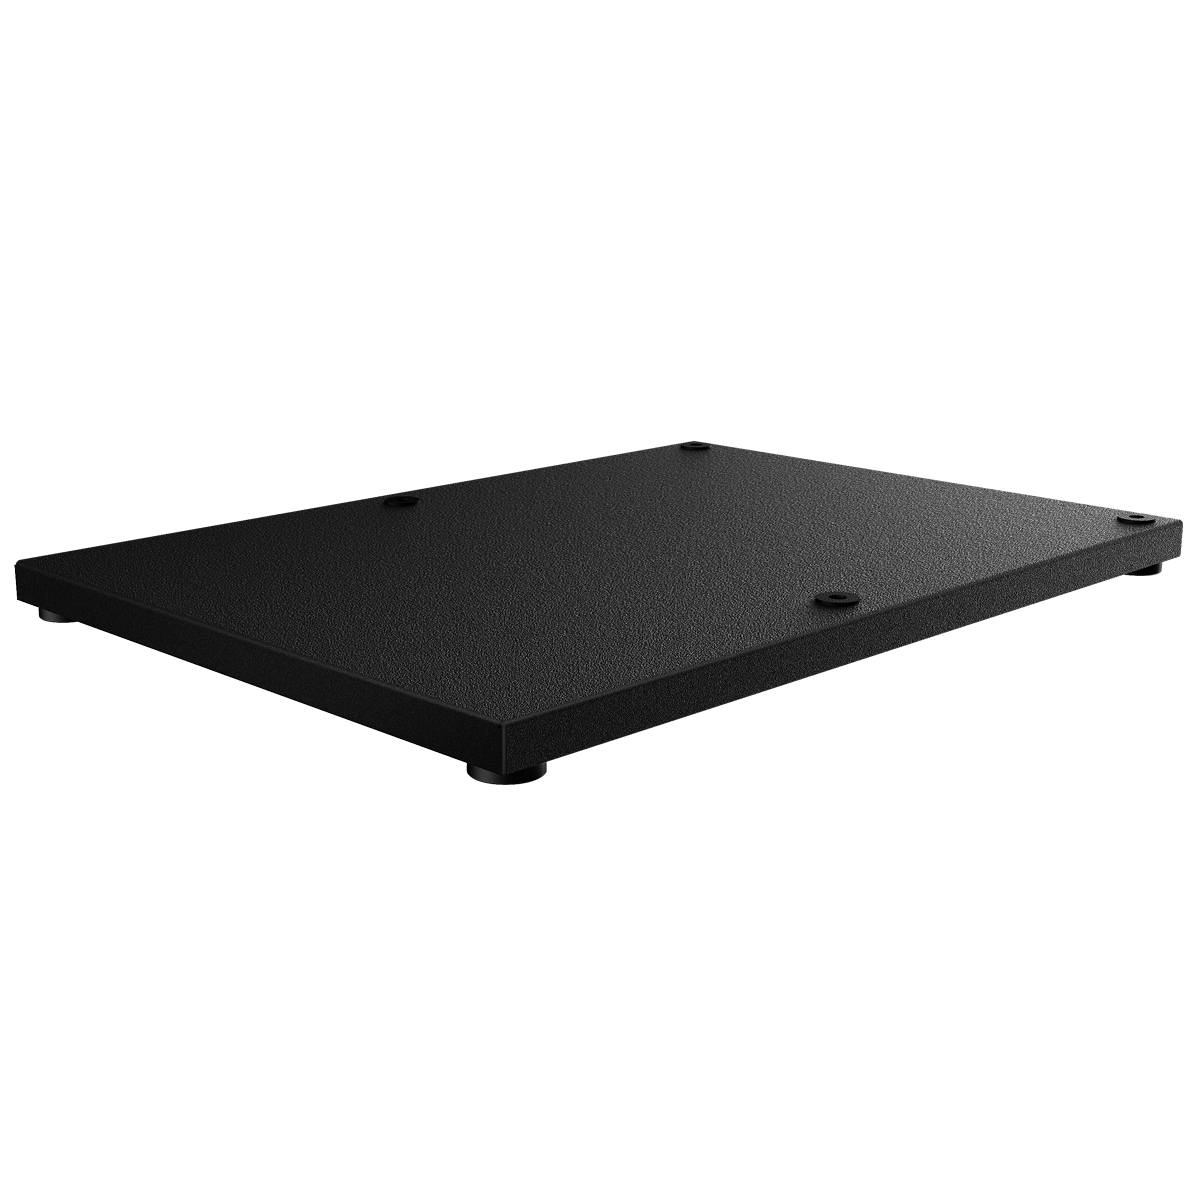 Accessories - Vaultek RS500-BP-A Base Plate For RS500i